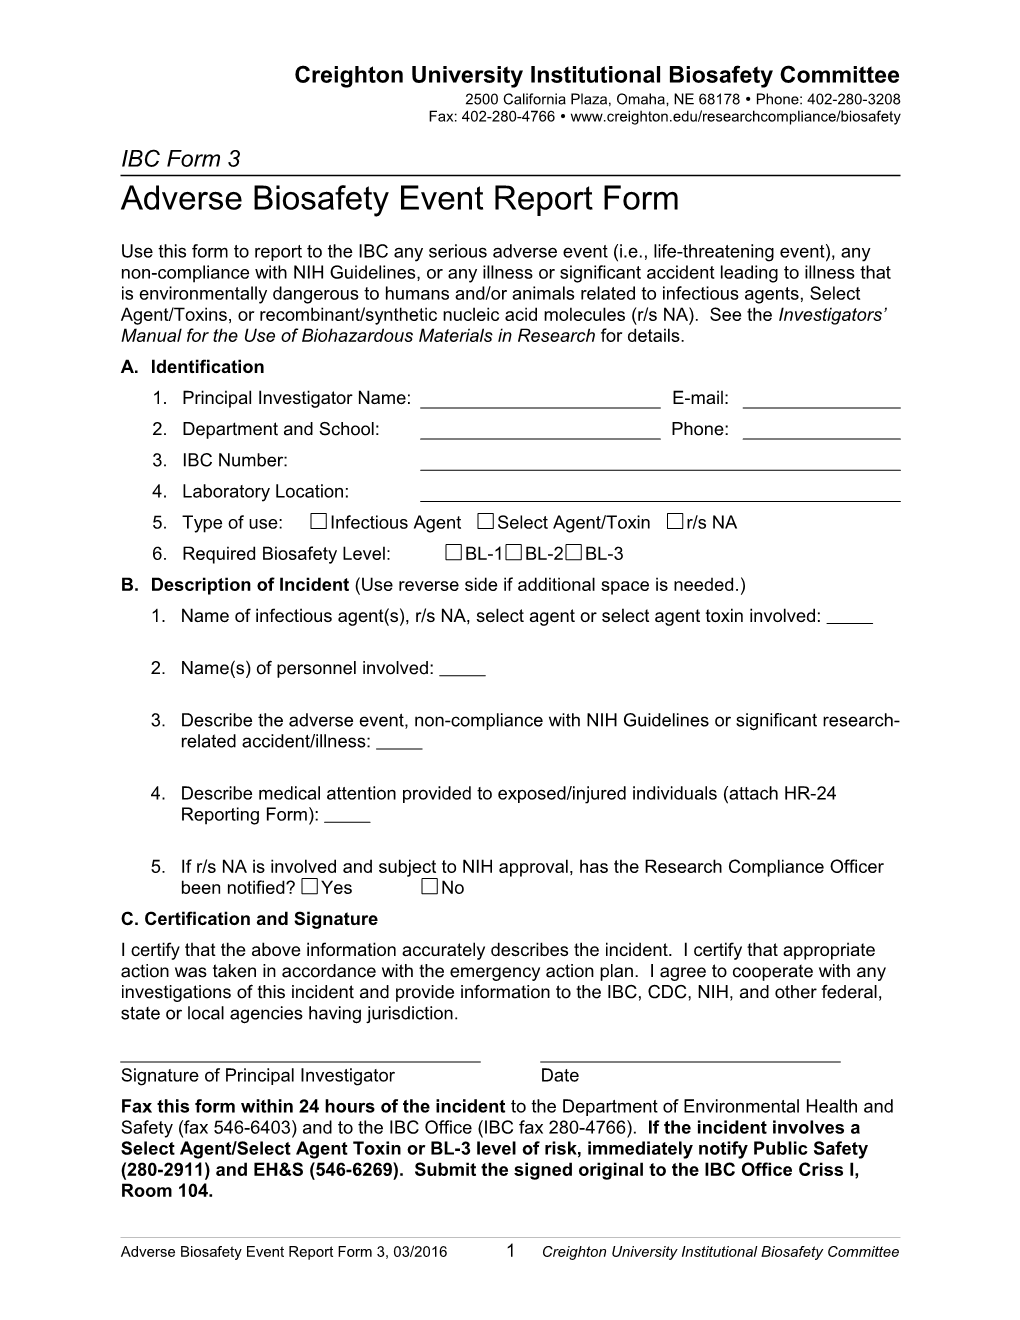 Adverse Biosafety Event Report Form